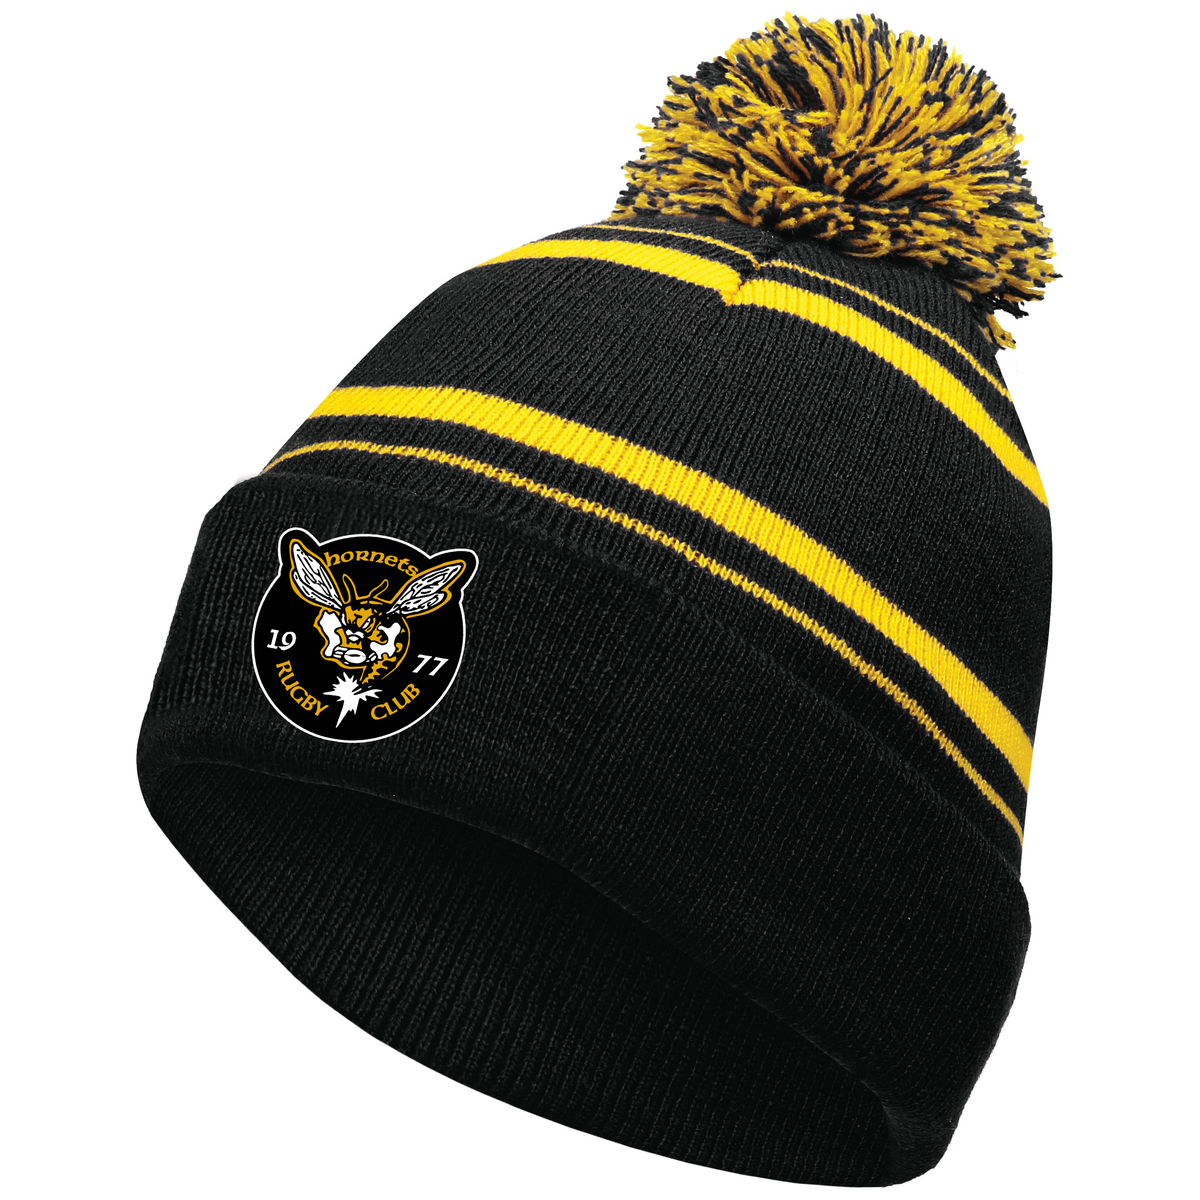 St. Louis Hornets Rugby Club Homecoming Beanie